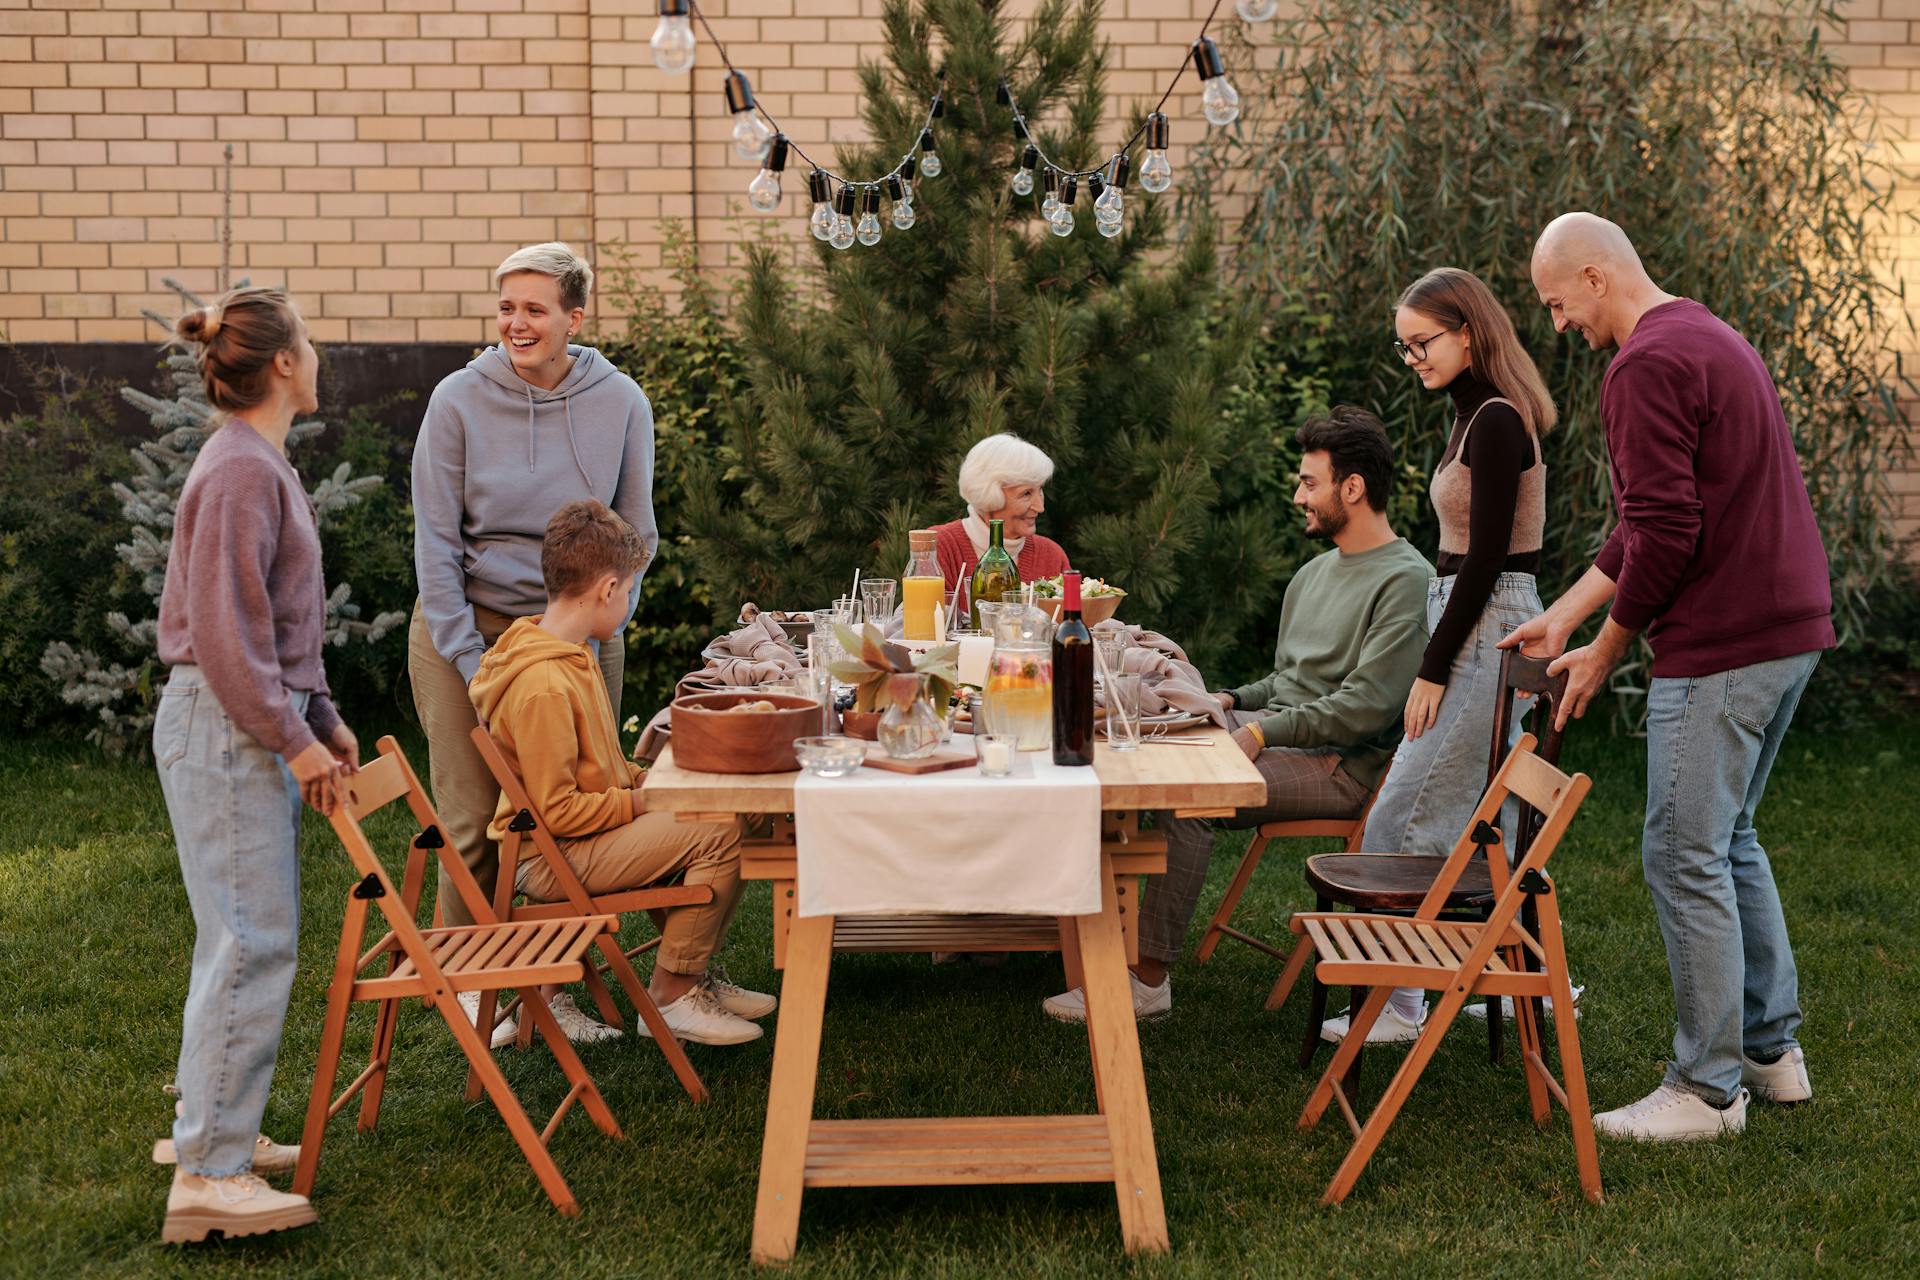 A family gathered around a dining table | Source: Pexels